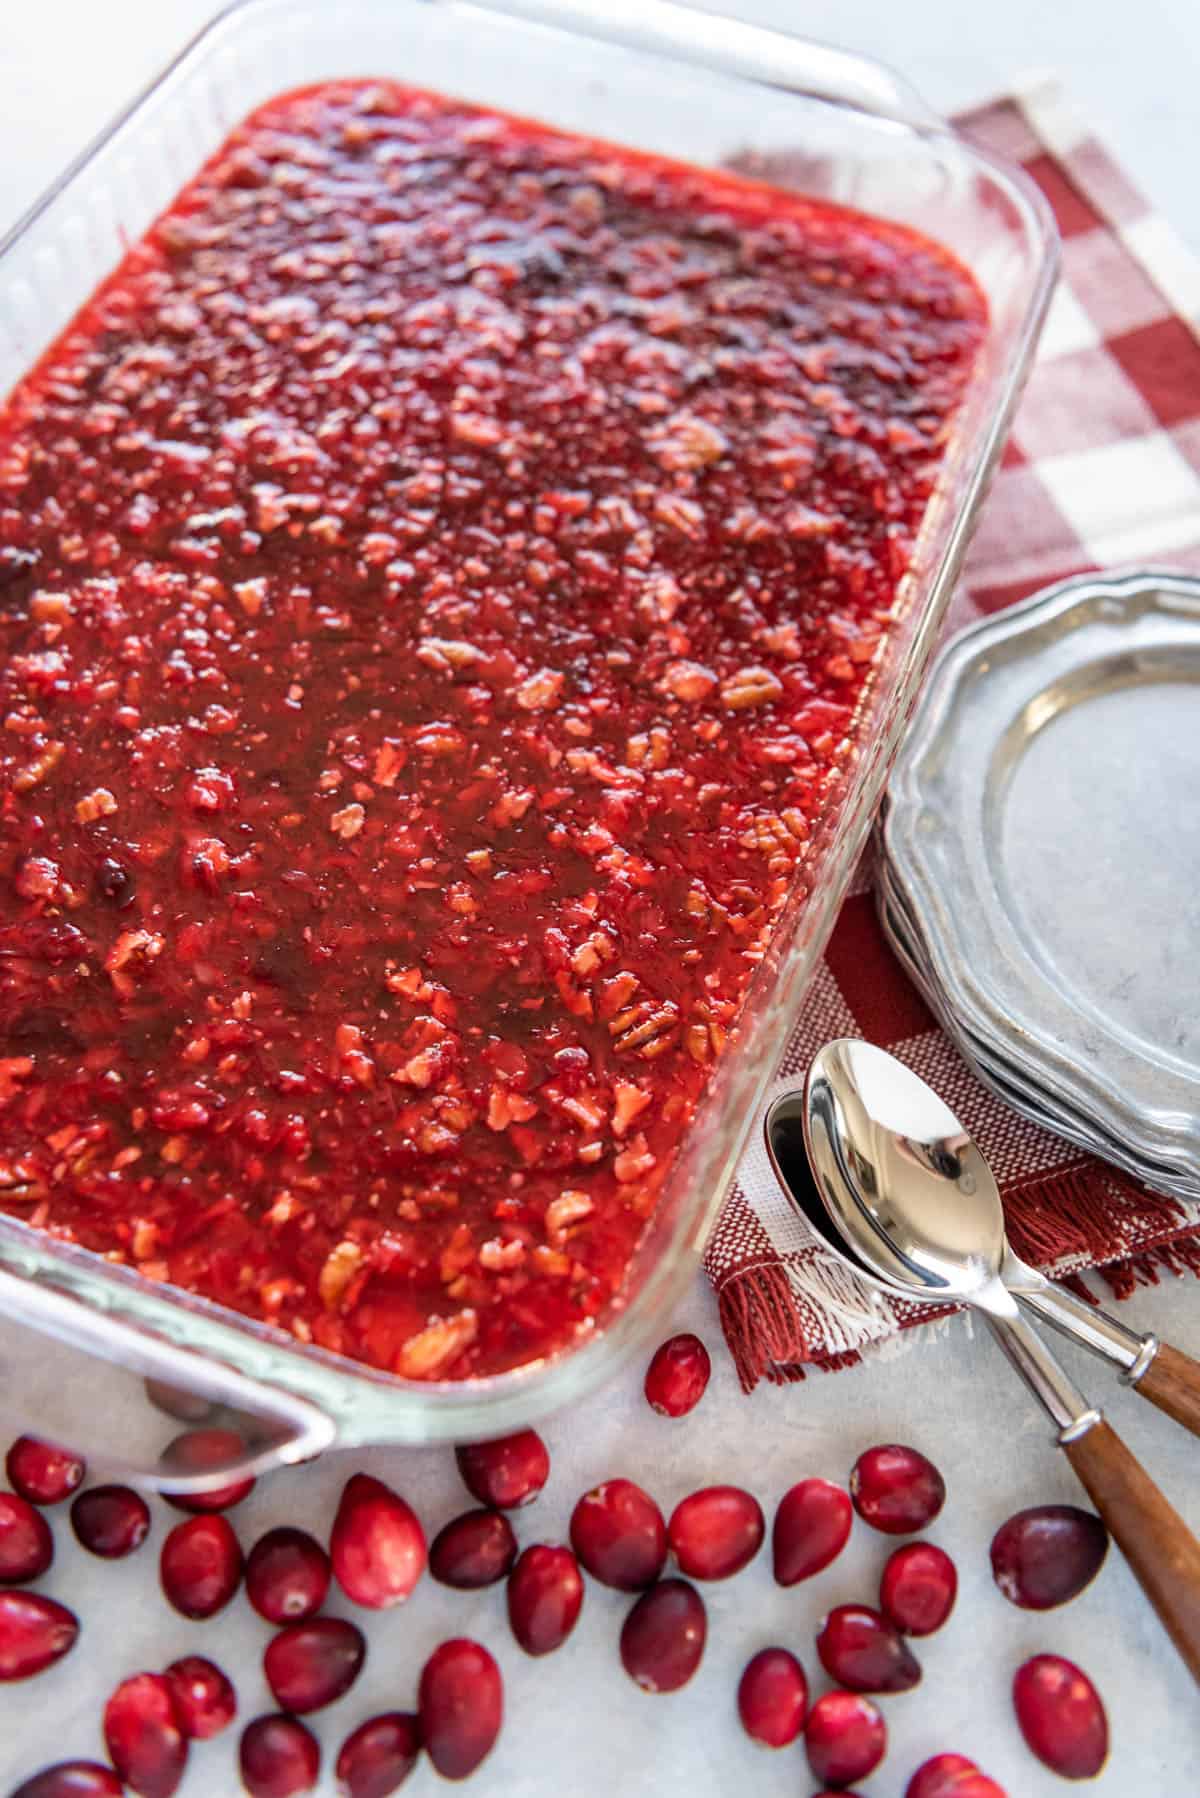 Cranberry jello salad in baking dish with fresh cranberries spoons and plates to the sides.